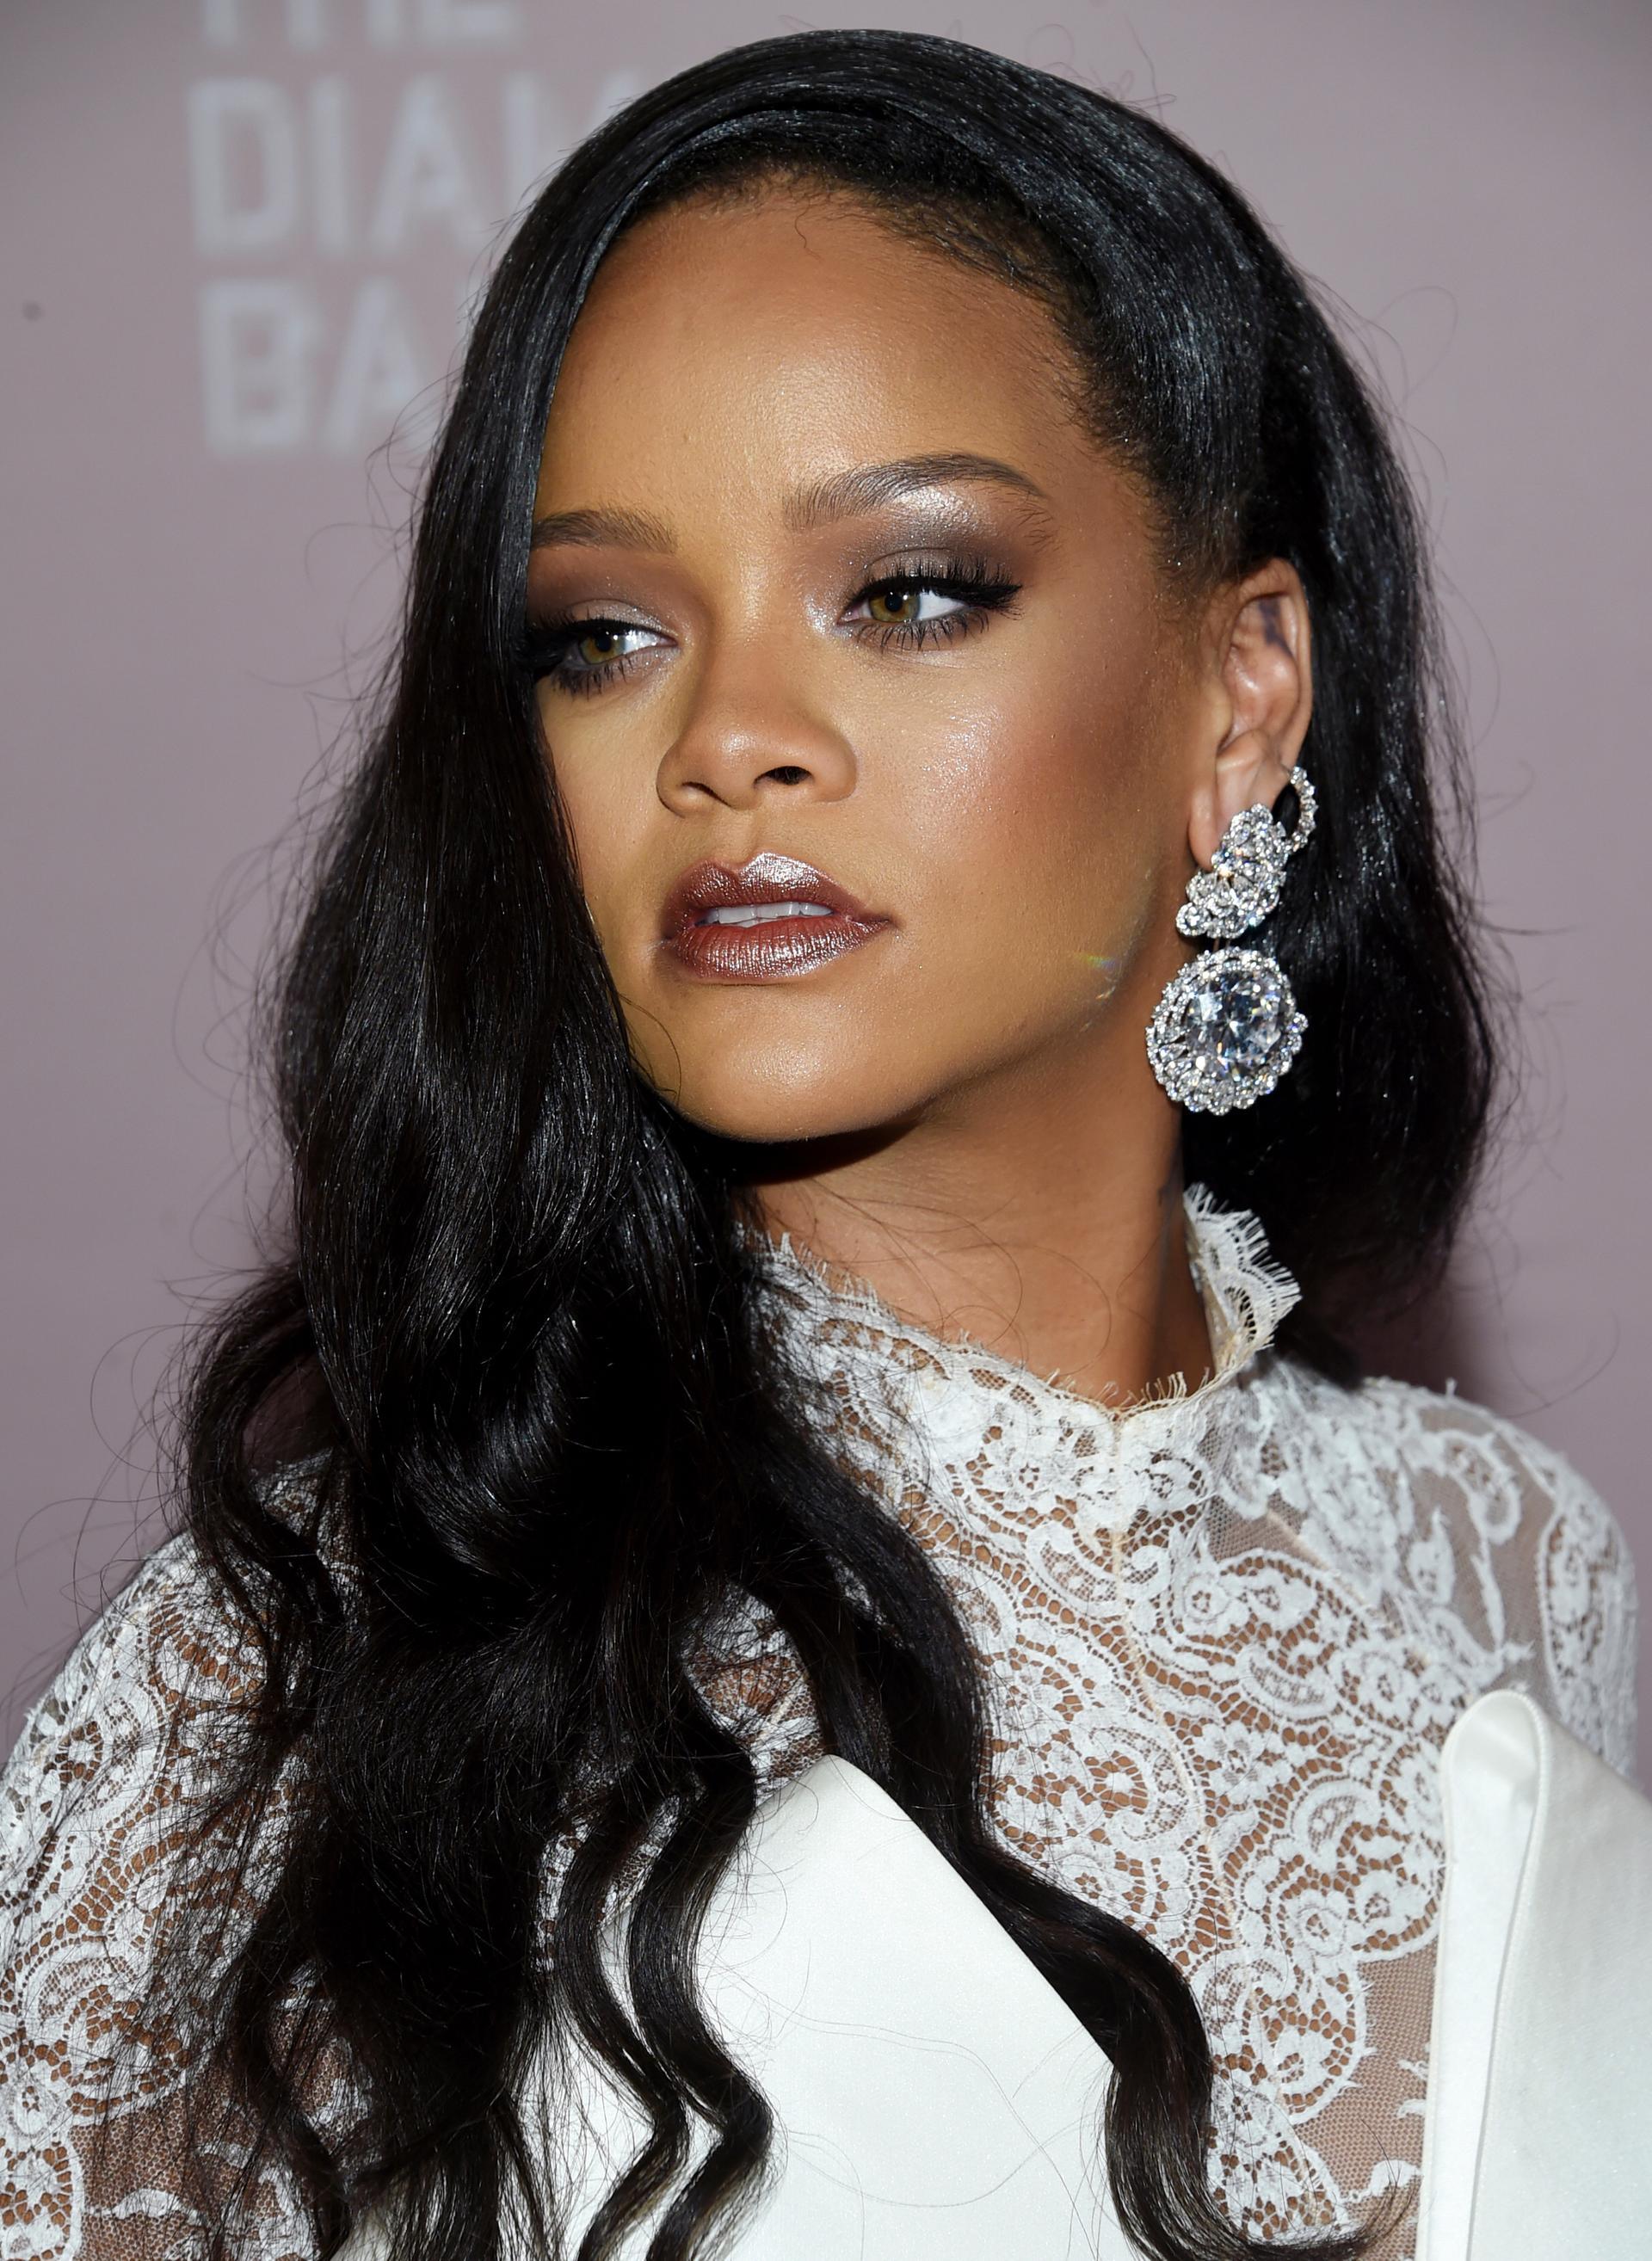 It's Official: Rihanna's New Luxury Fashion Brand Is Coming Soon – WWD